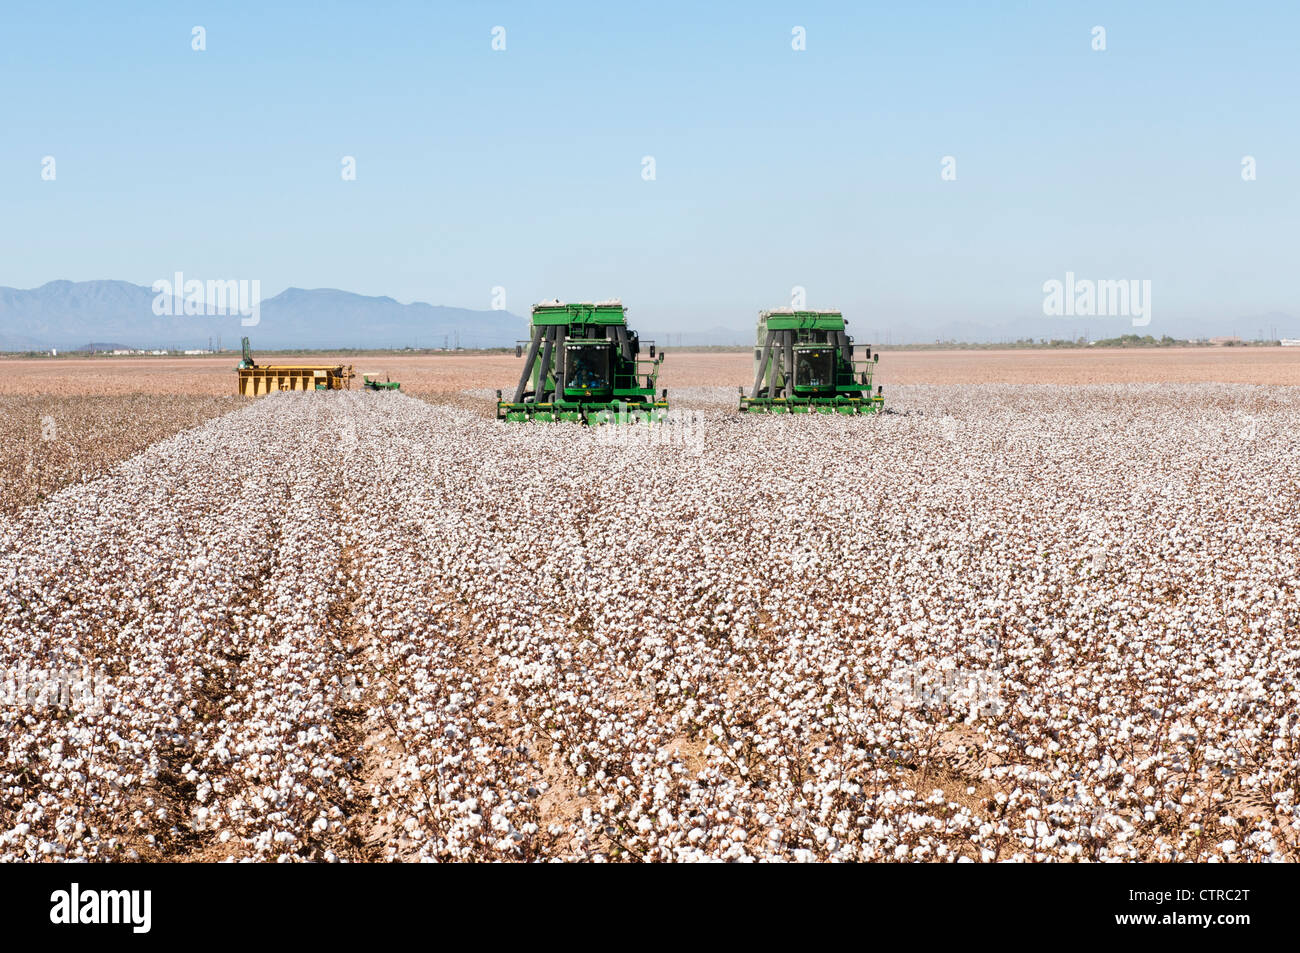 A pair of cotton picking machines harvest a cotton field in Arizona. A module packing machine is shown in the background. Stock Photo